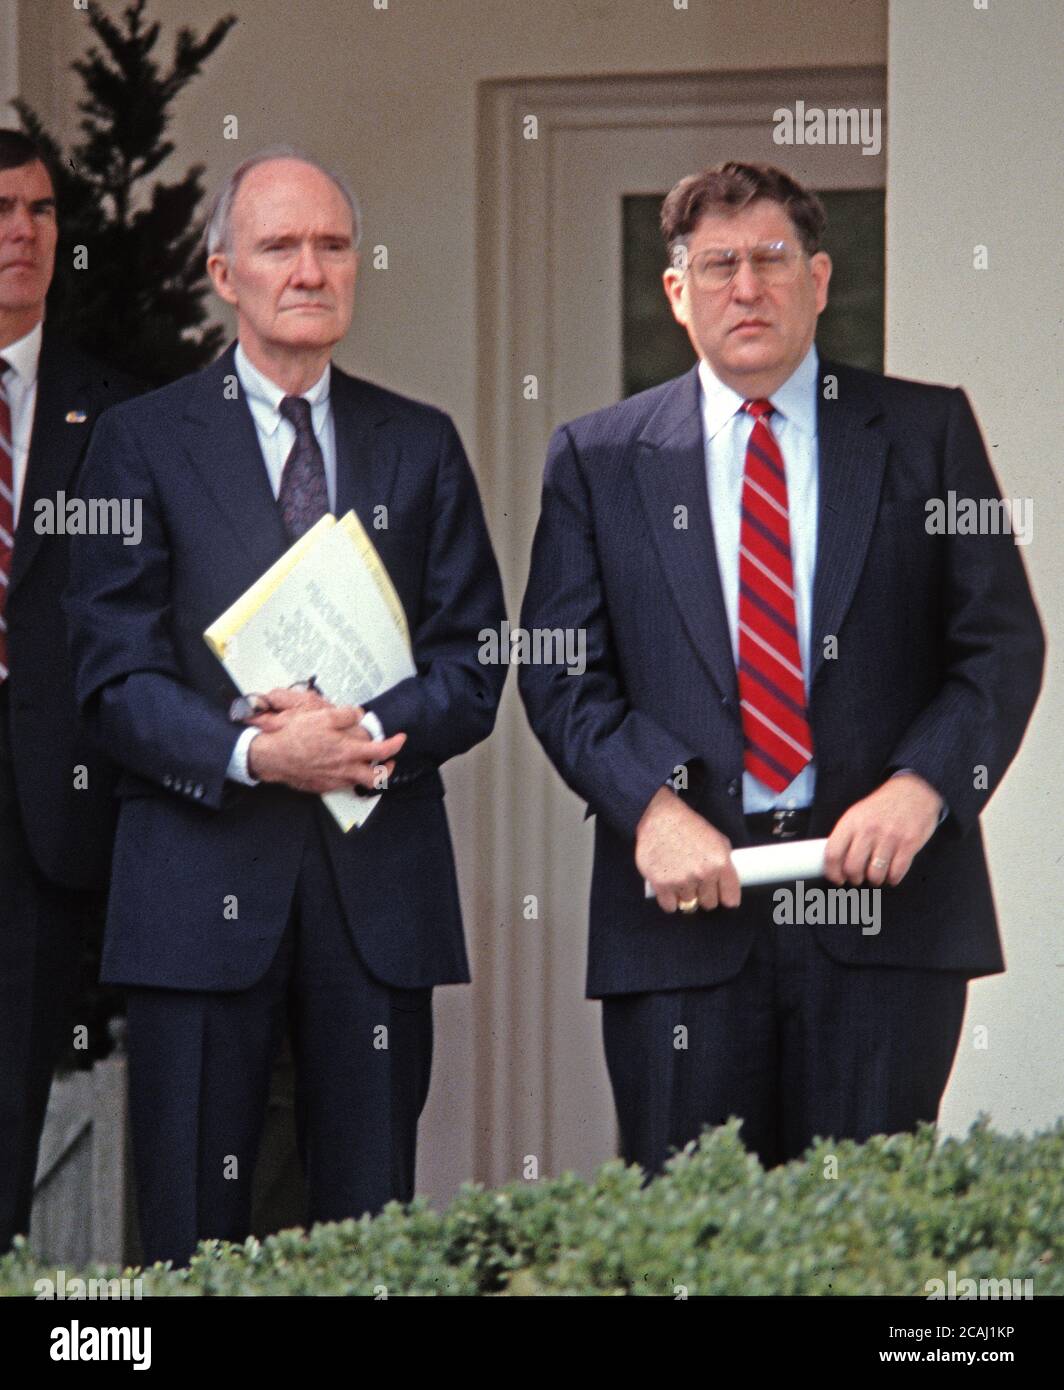 In this file photo, National Security Advisor Brent Scowcroft and White House Chief of Staff John Sununu look on as United States President George H.W. Bush (not pictured) reads a statement rejecting the proposed Soviet peace agreement to end the Gulf War with Iraq in the Rose Garden of the White House in Washington, DC on February 22, 1991.Credit: Howard L. Sachs/CNP | usage worldwide Stock Photo